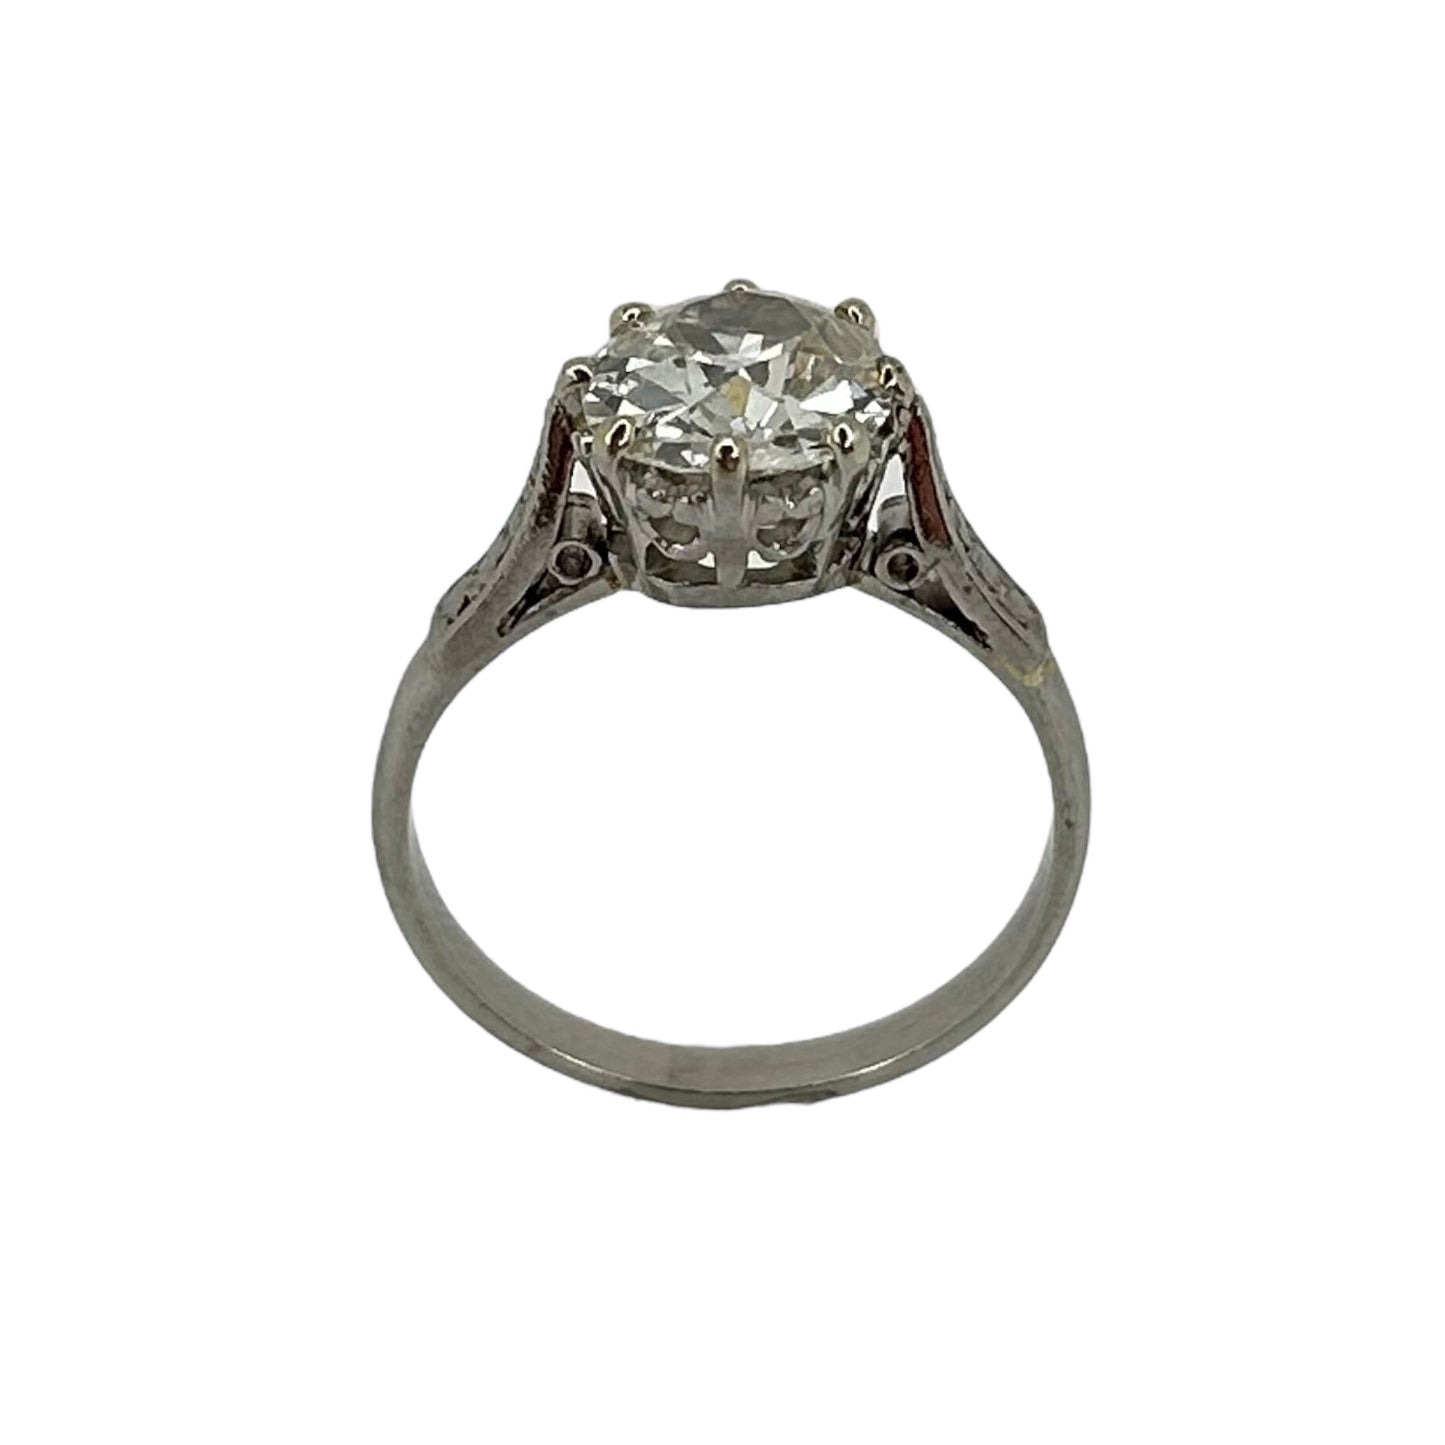 ANTIQUE 1.50 CTW OLD EURO CUT SOLITAIRE ENGAGEMENT RING